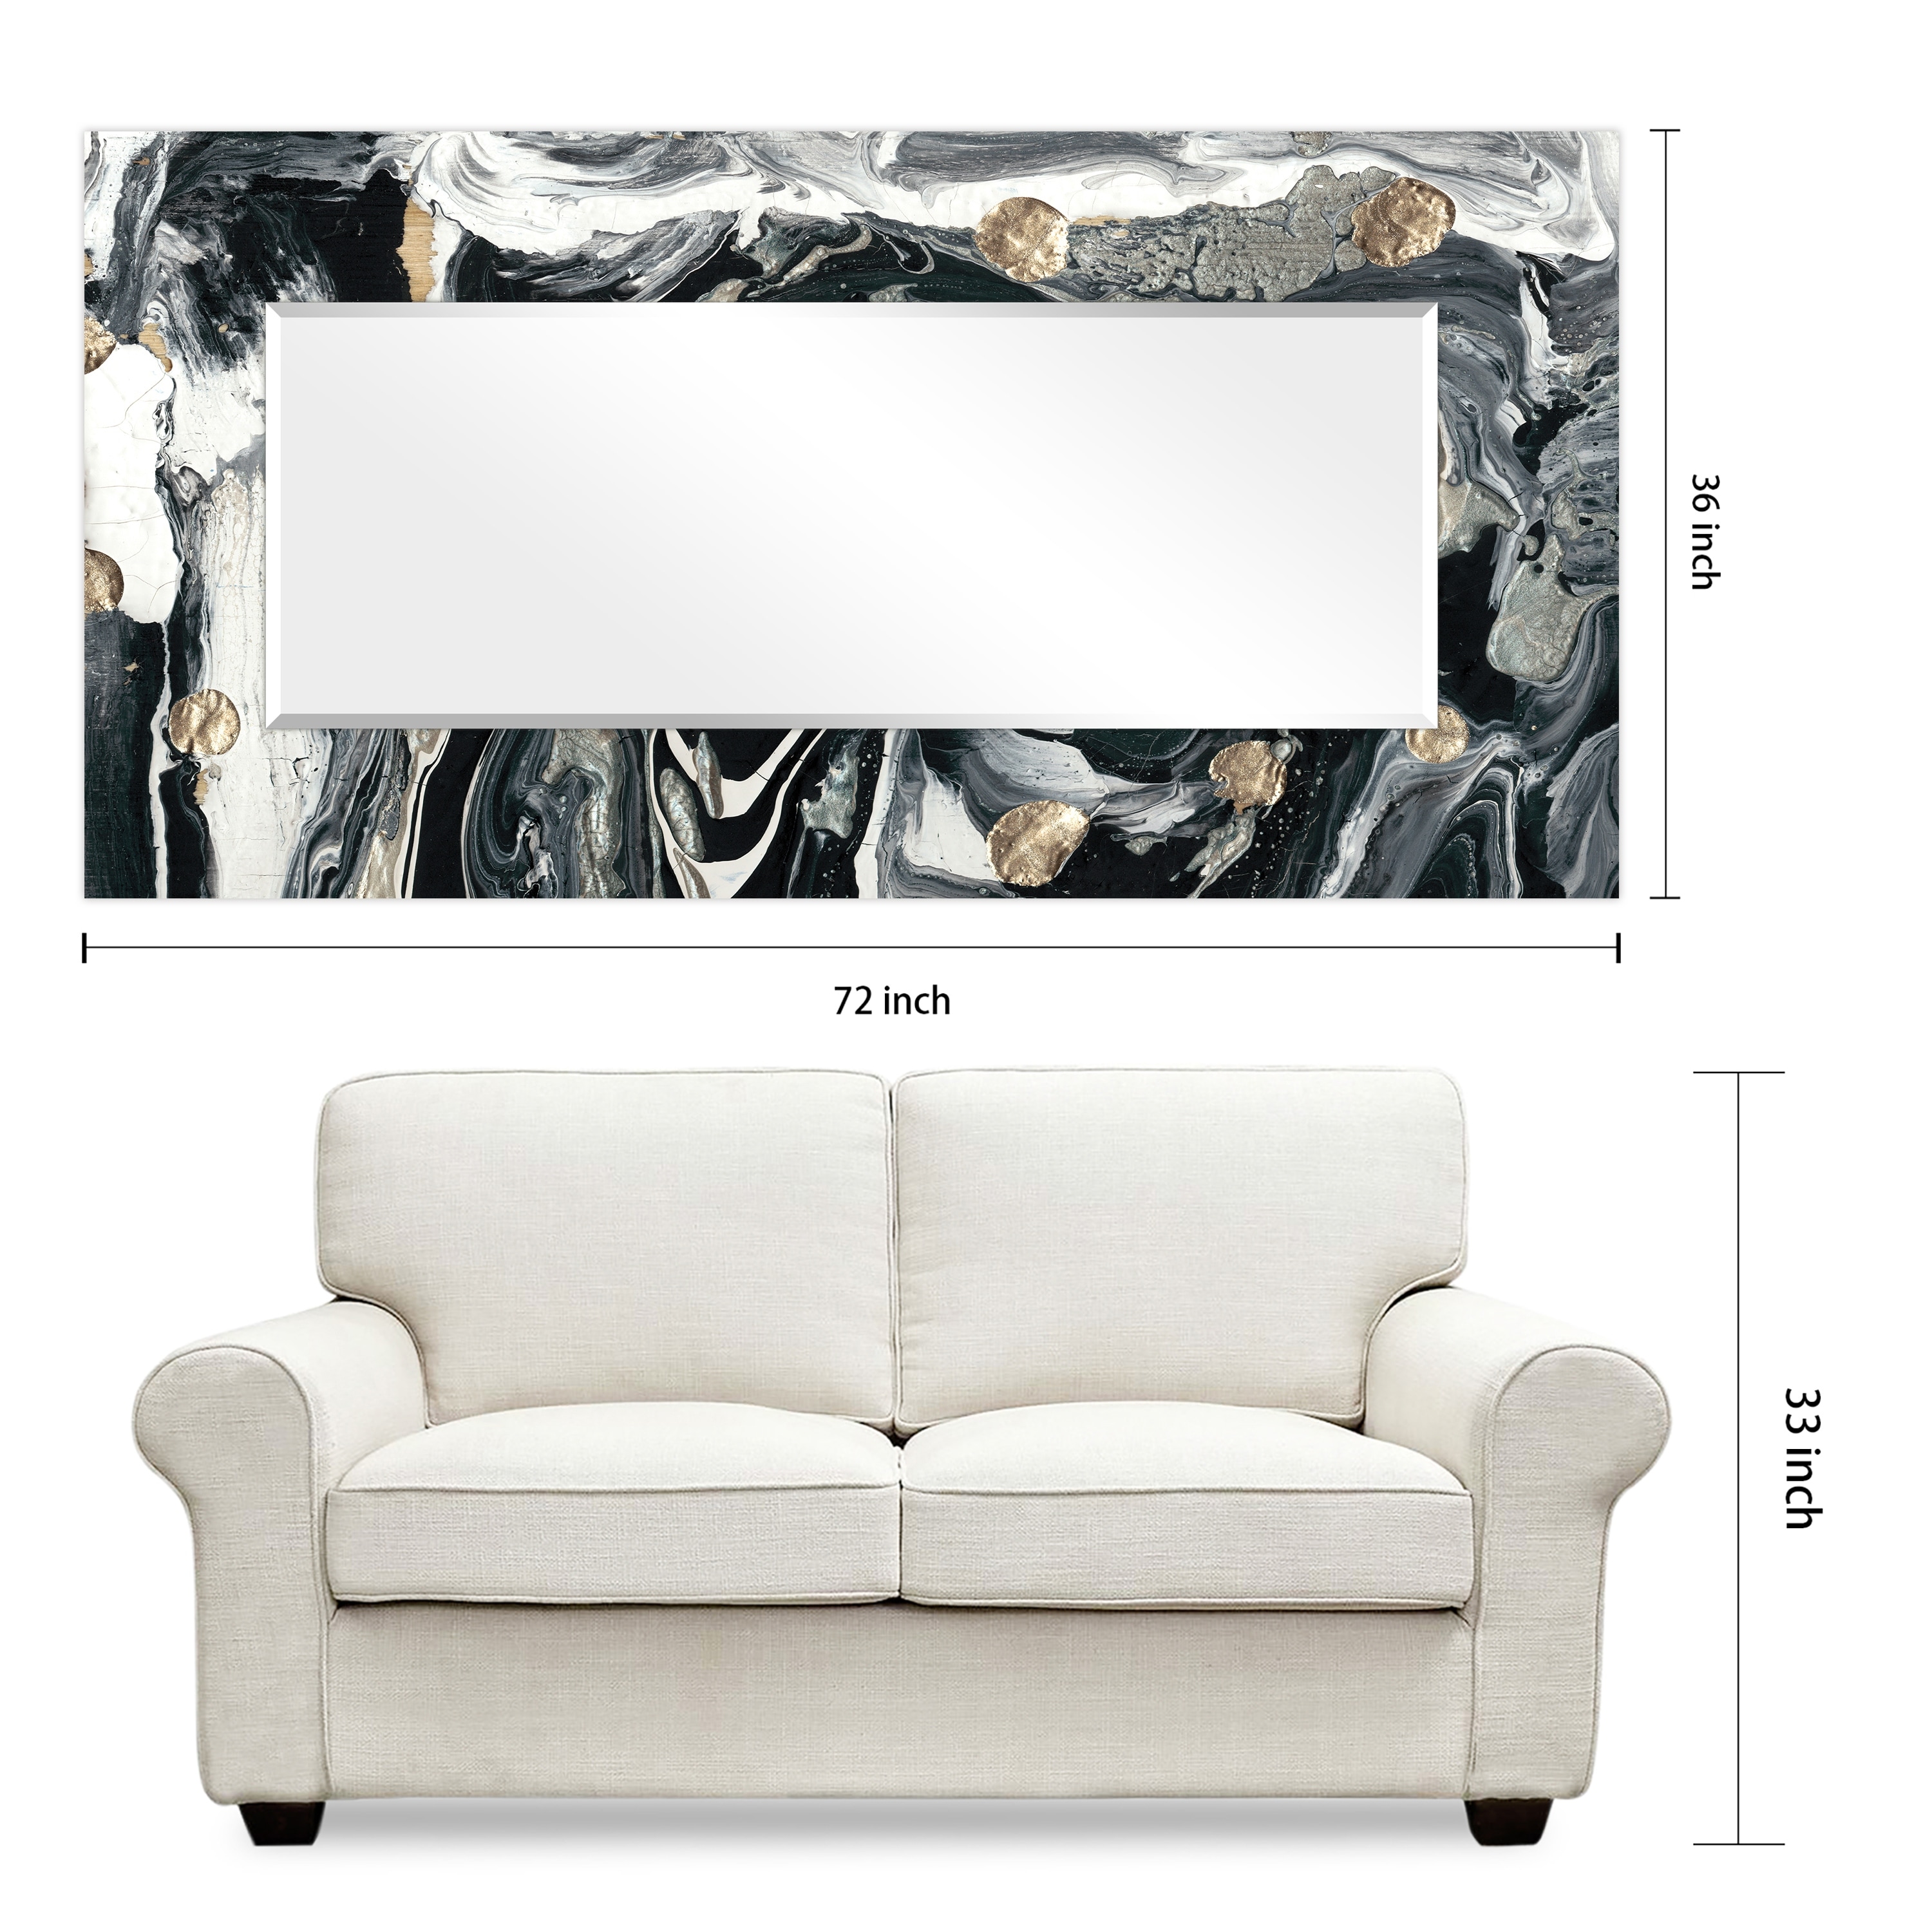 "Ebony & Ivory" Abstract Rectangular Beveled Wall Mirror on Free Floating Glass - Clear - 72 x 36